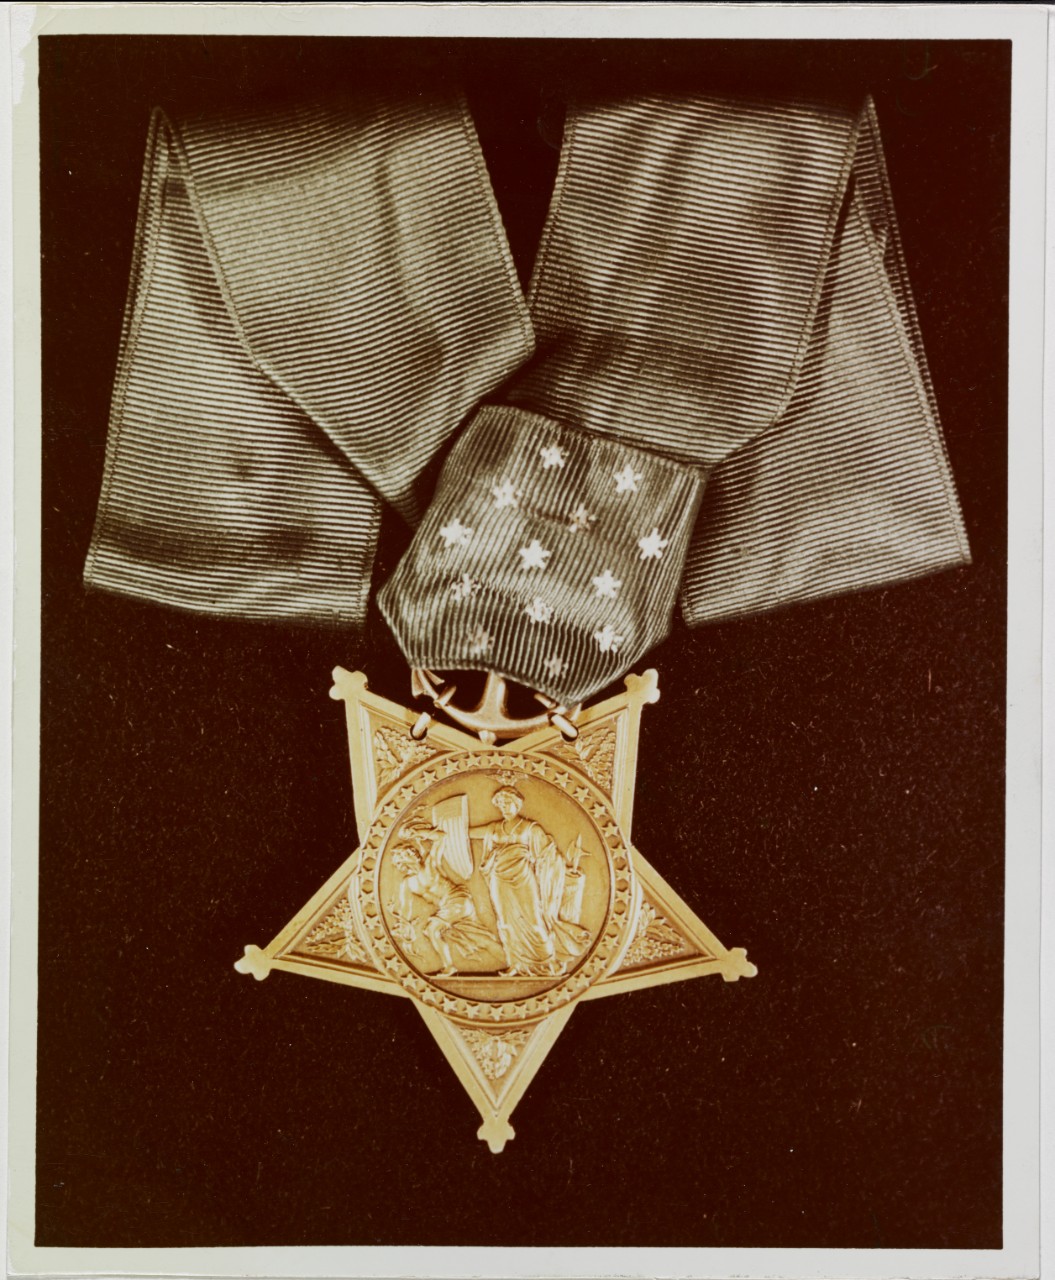 Photo #: NH 86703-KN U.S. Navy Medal of Honor